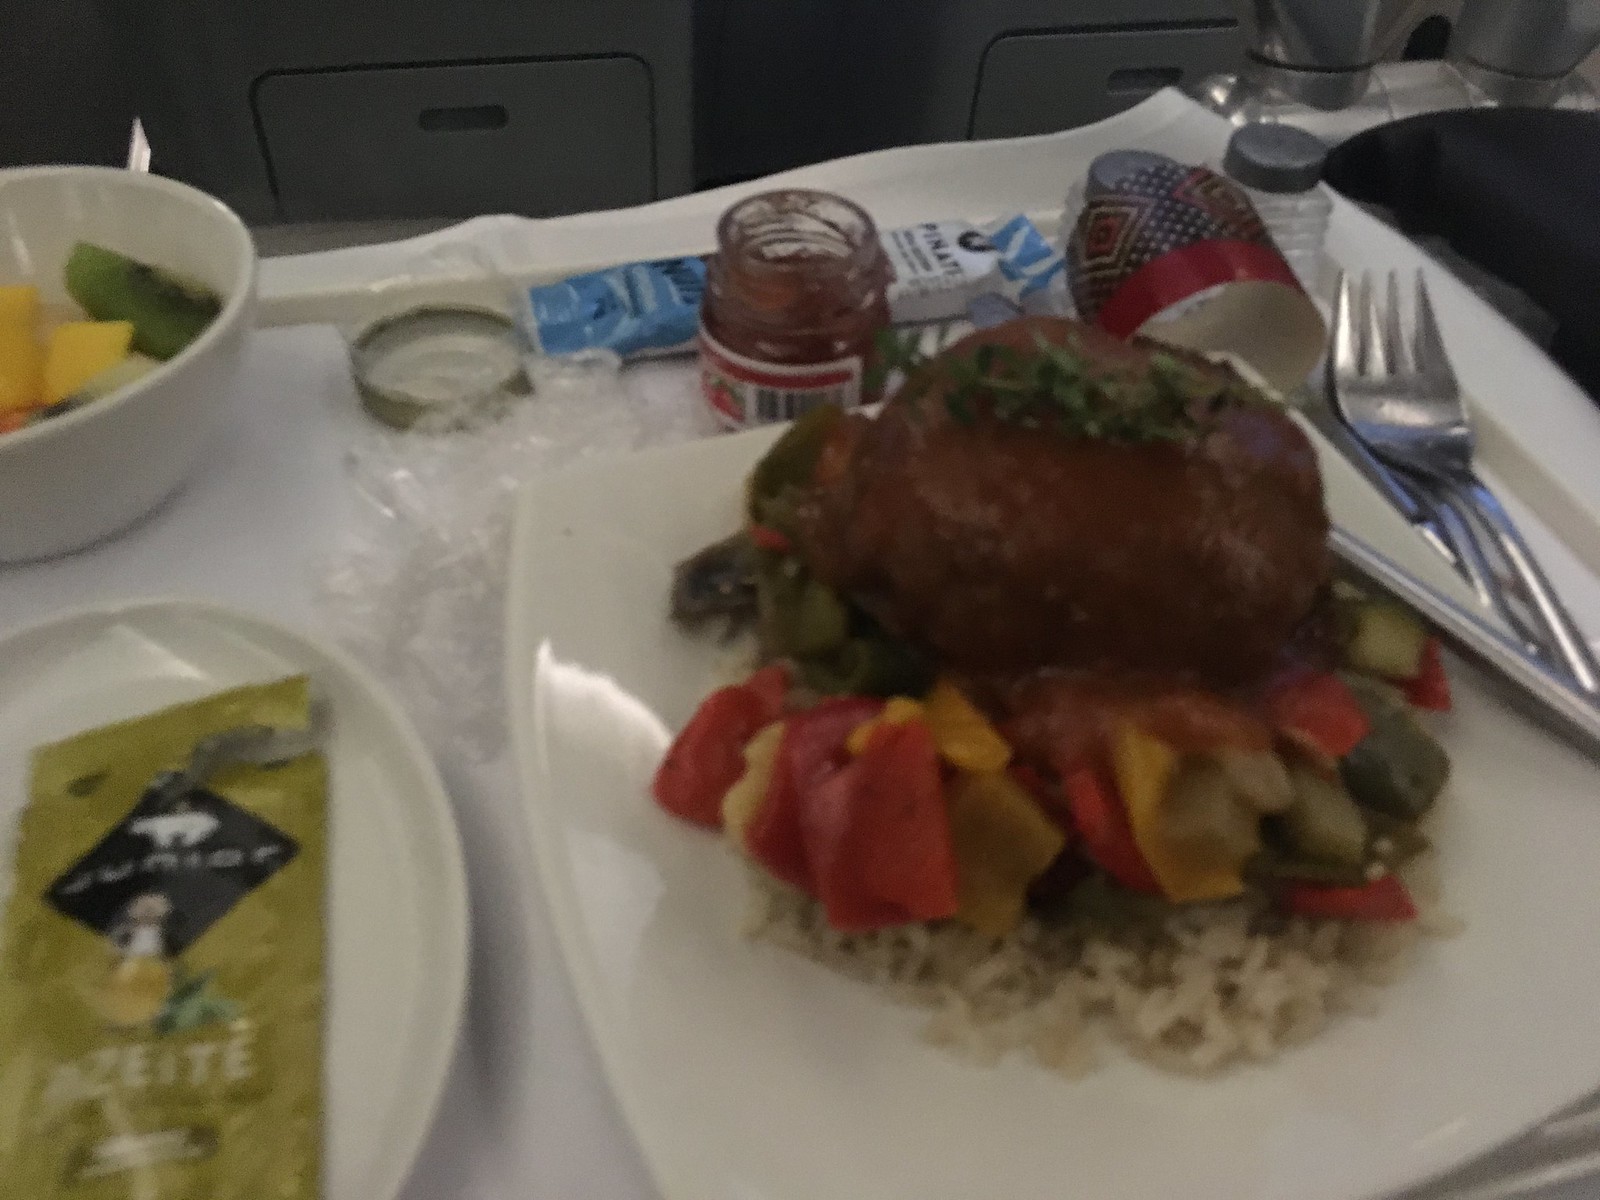 South African Airways dinner in business class - special vegan meal